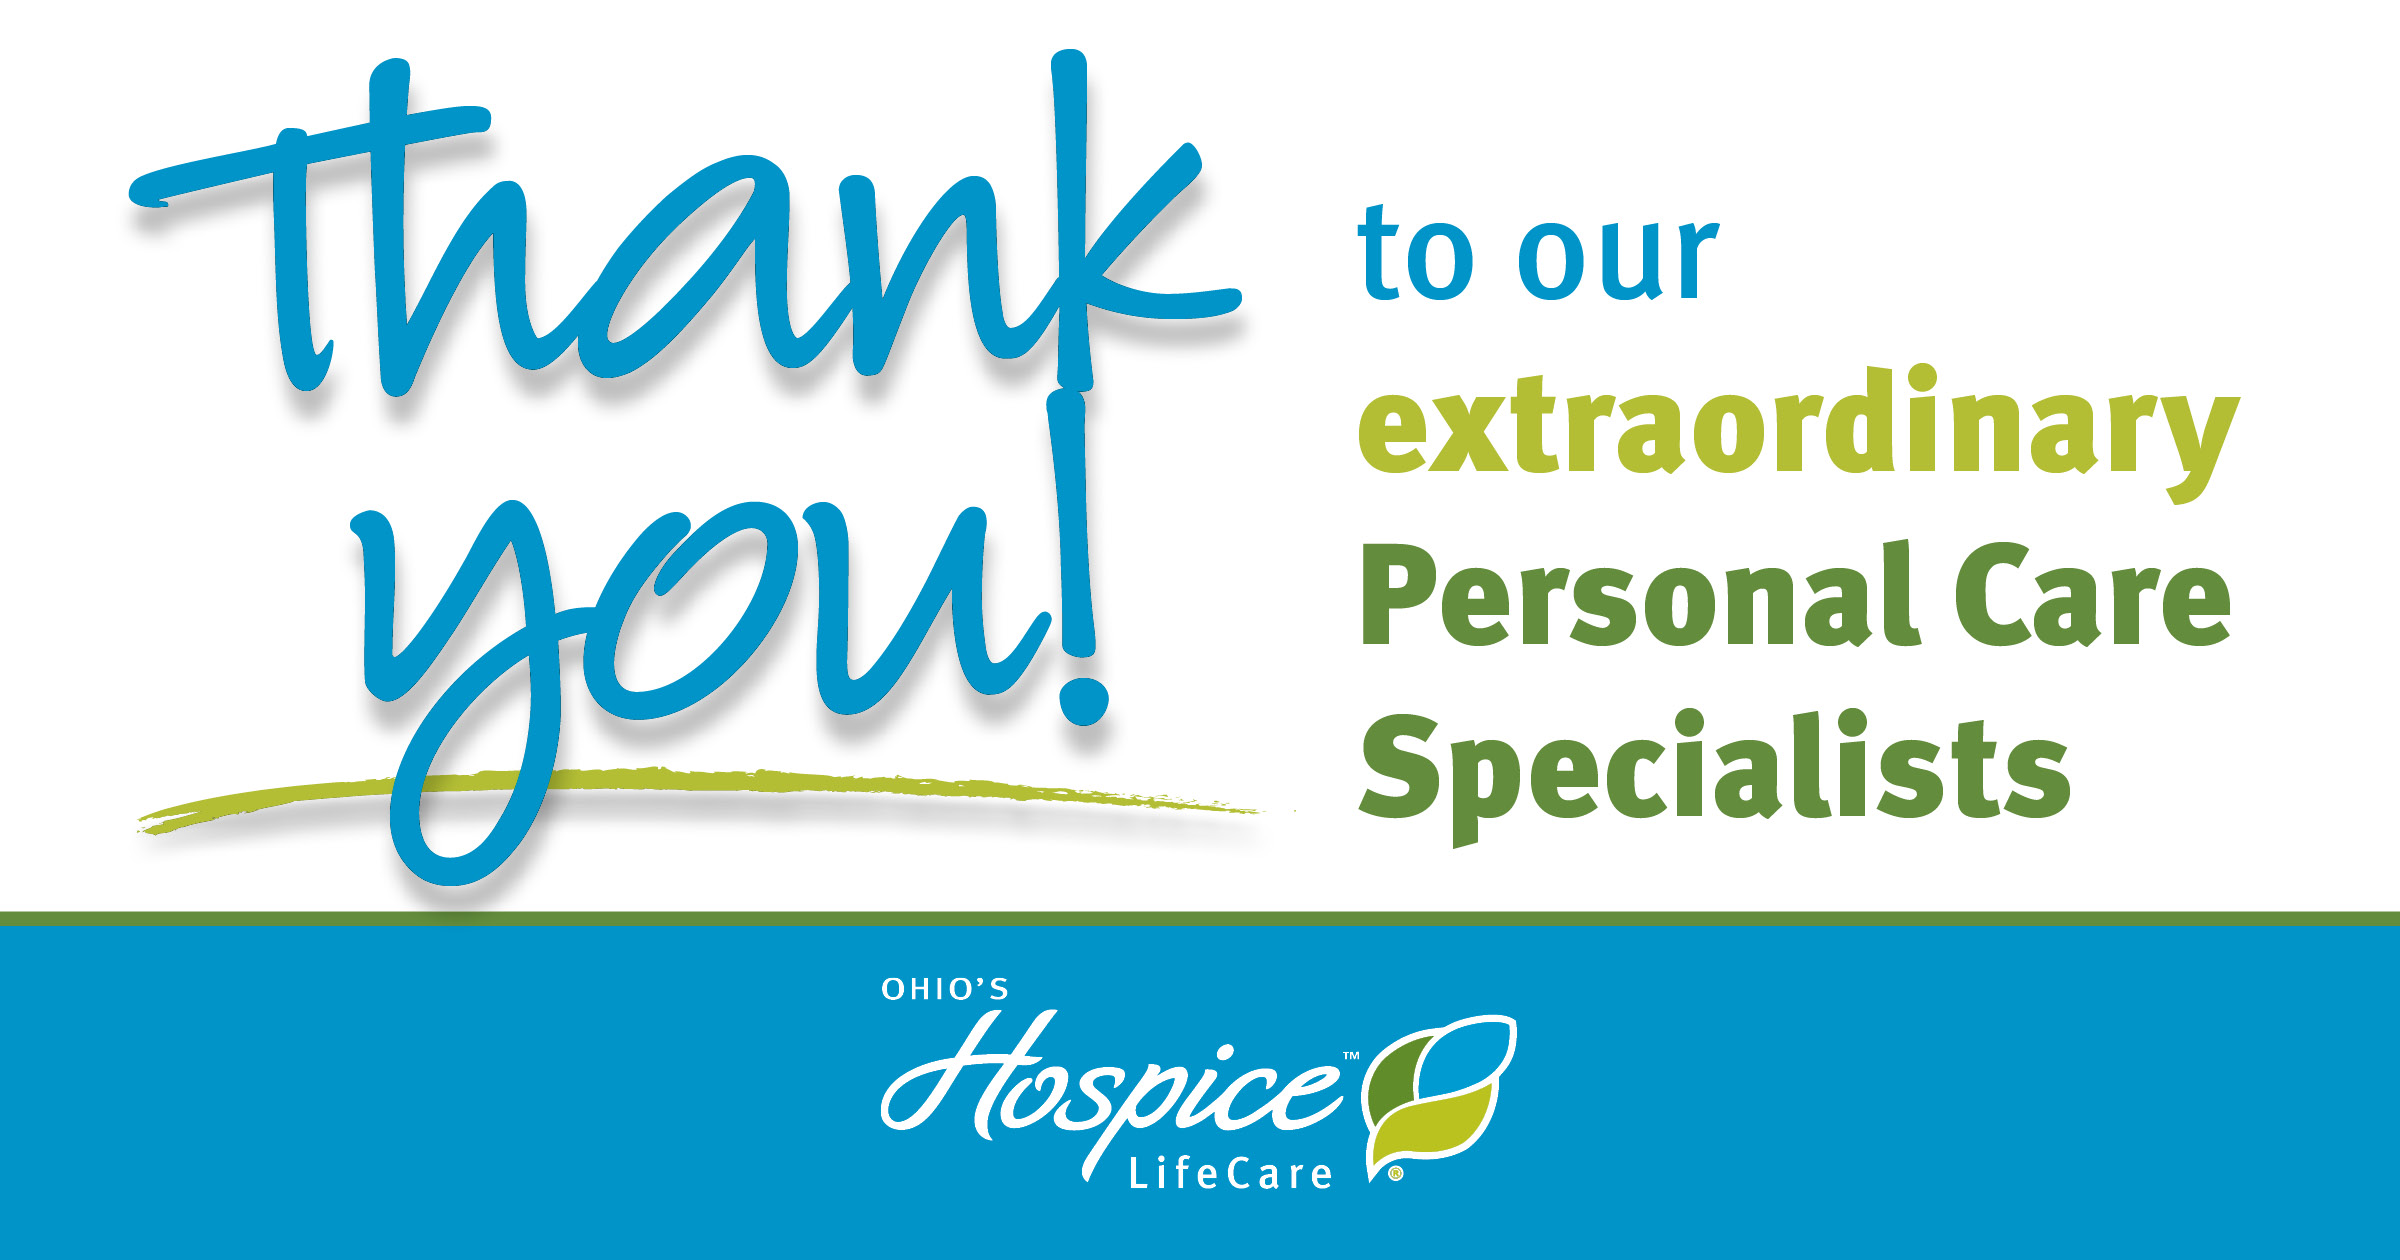 Thank you to our extraordinary Personal Care Specialists!